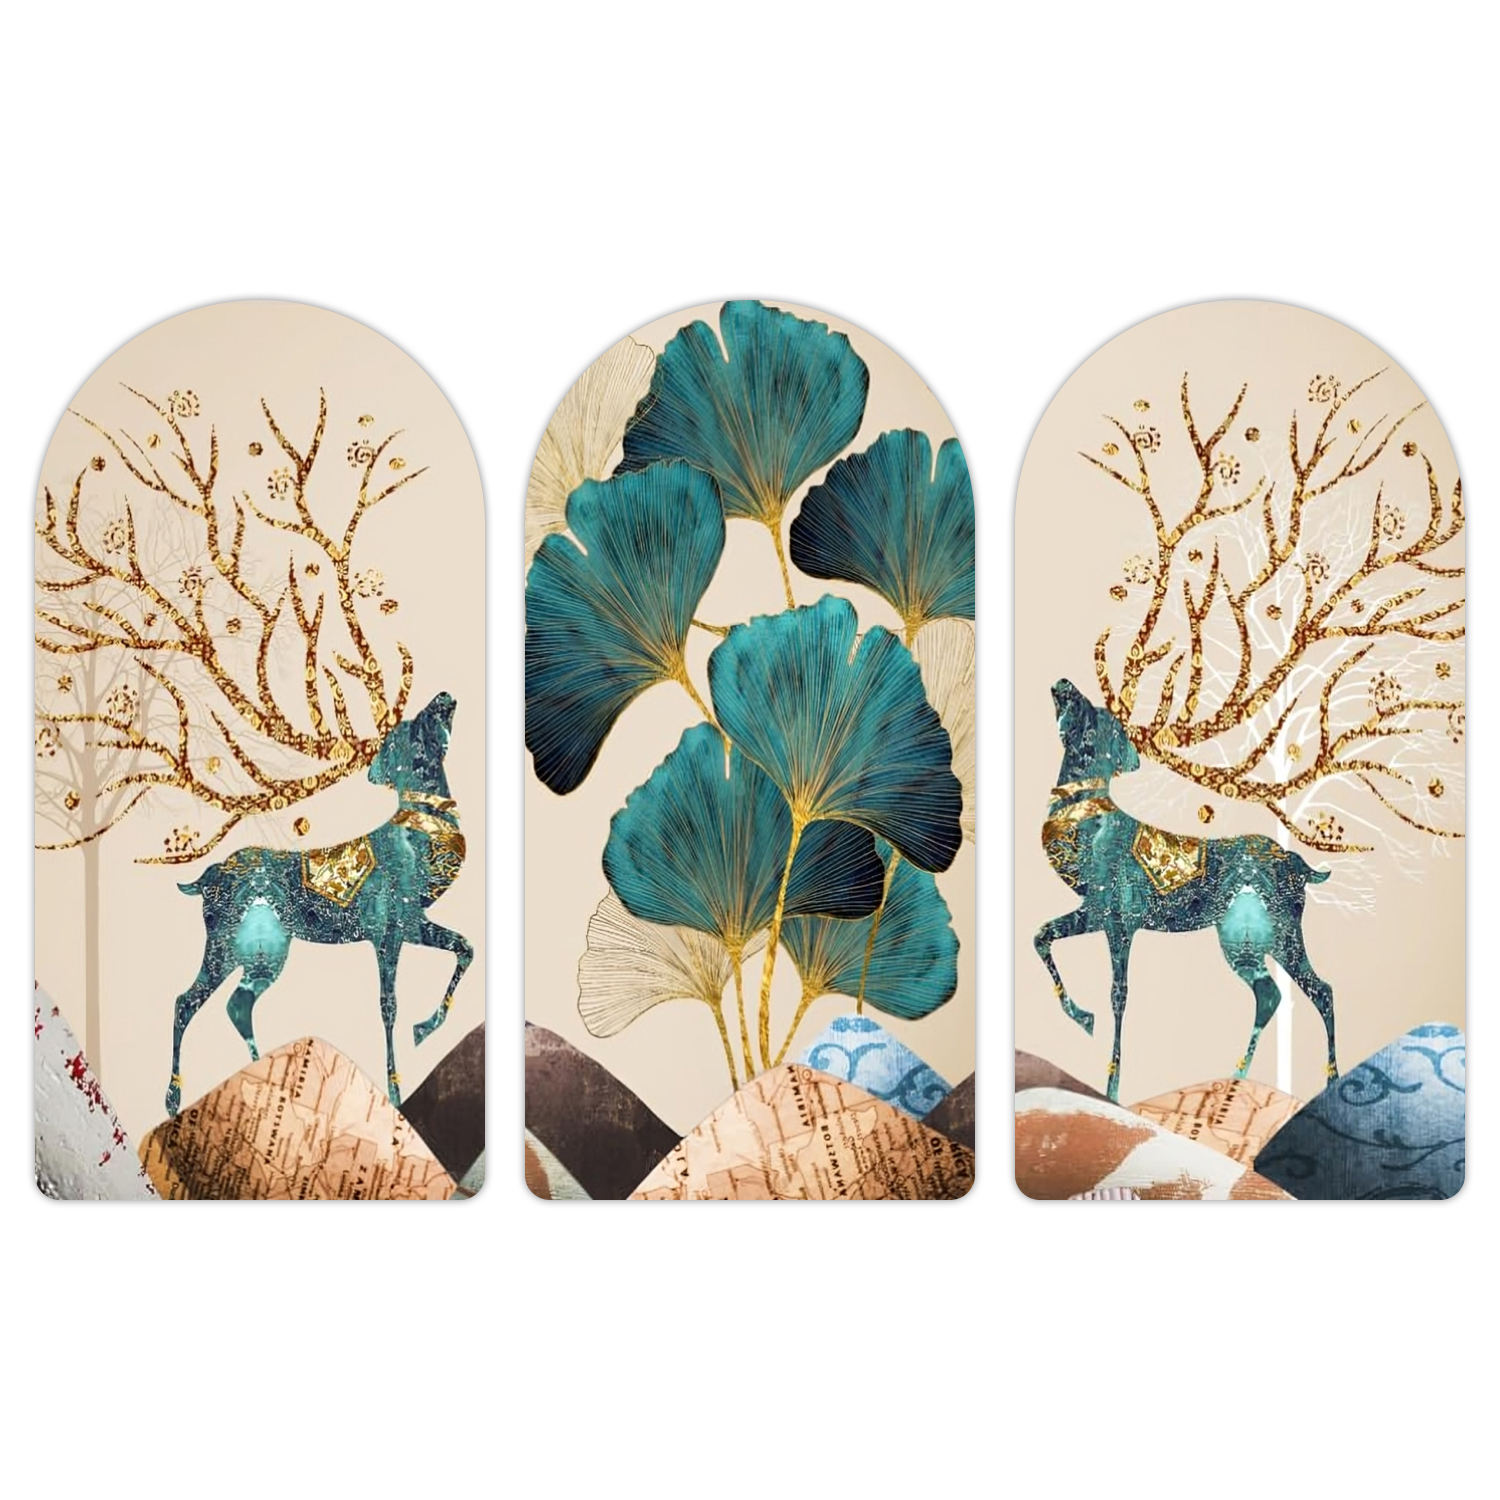 Nature Mural Wood Print Wooden Plank Set Of 3 Decor